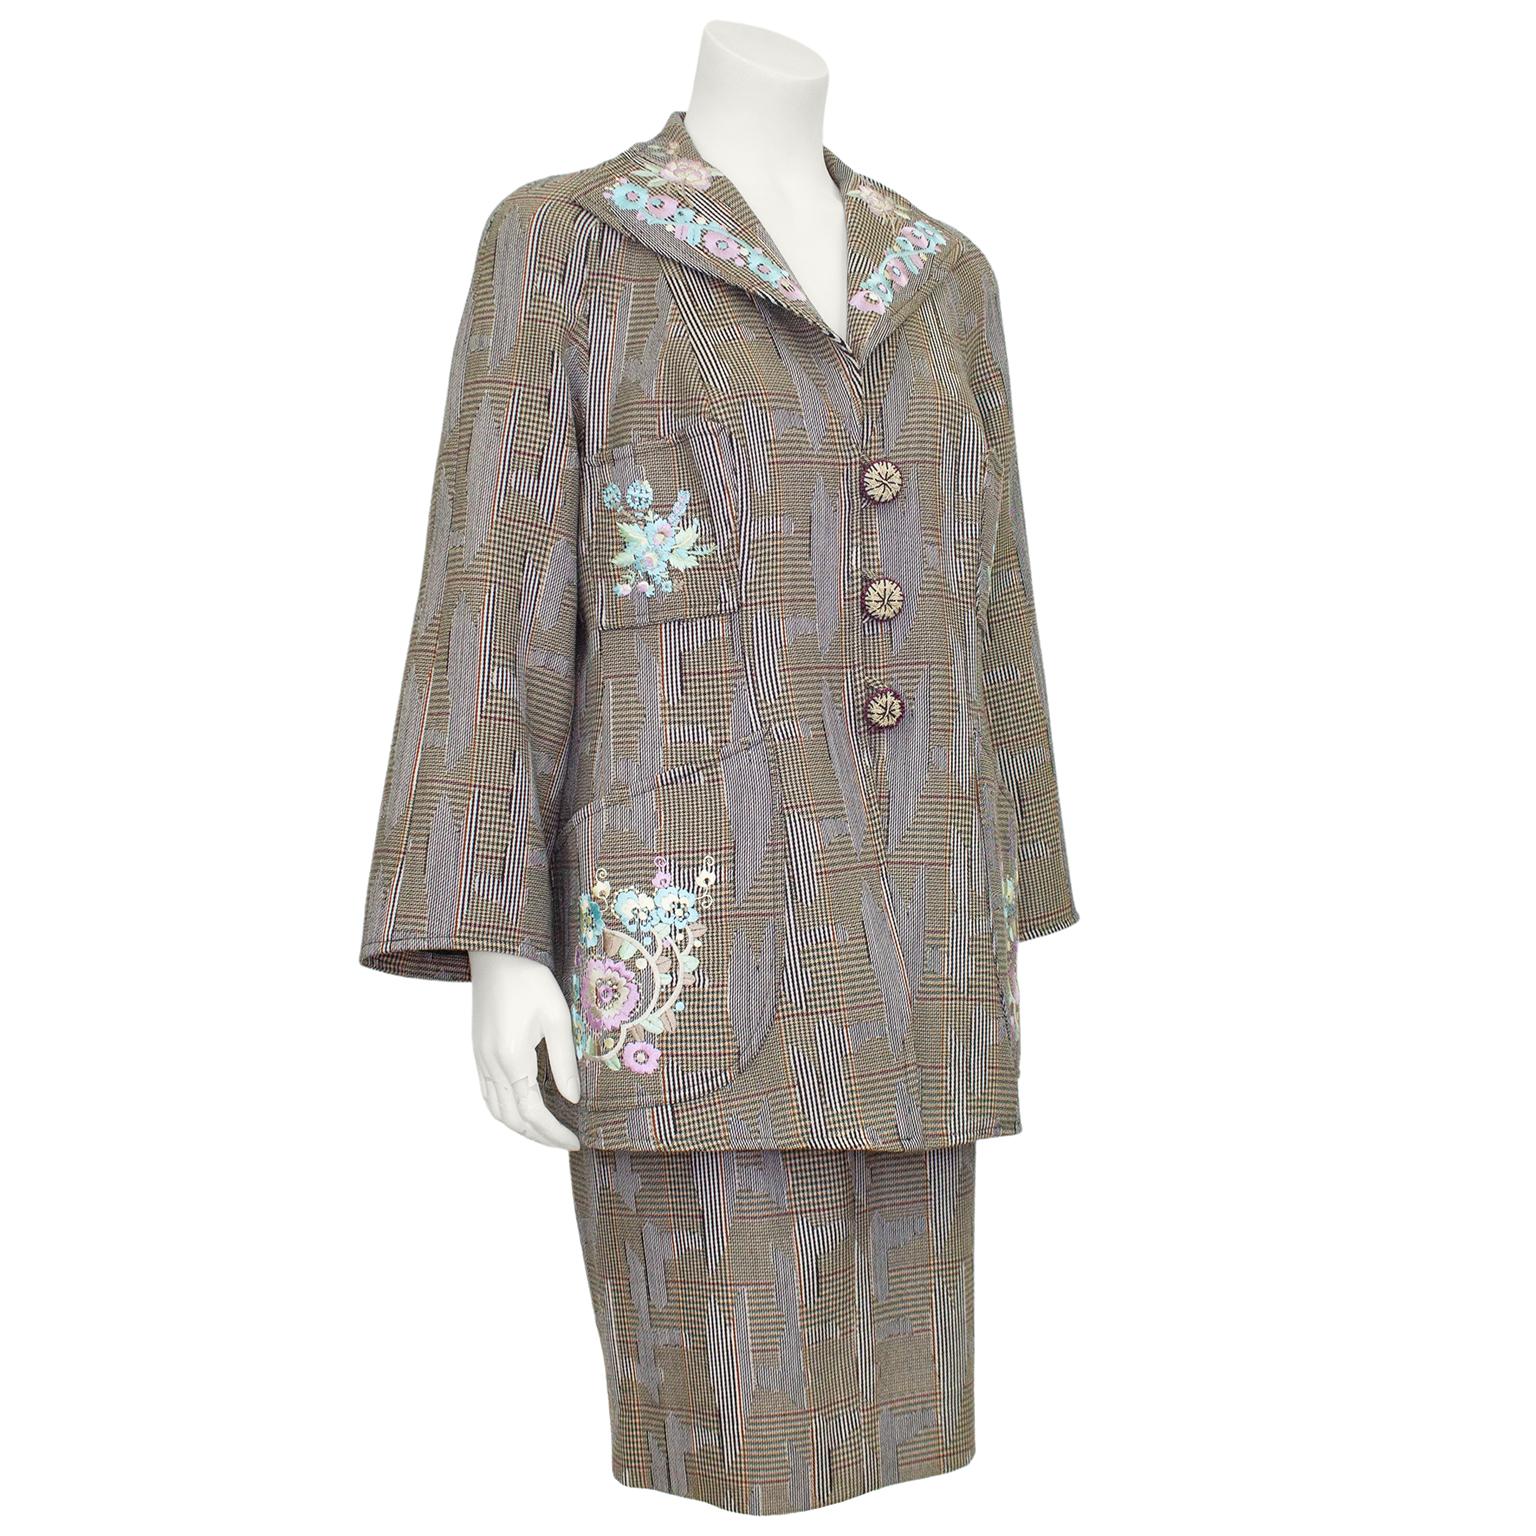 1990s Christian Lacroix tweed skirt suit with pastel floral embroidery. The long jacket is flattering and hugs the body with U shaped pockets on the hips and smaller pockets at the bust. Fastens with a placket and 3 oversized embroidered buttons at